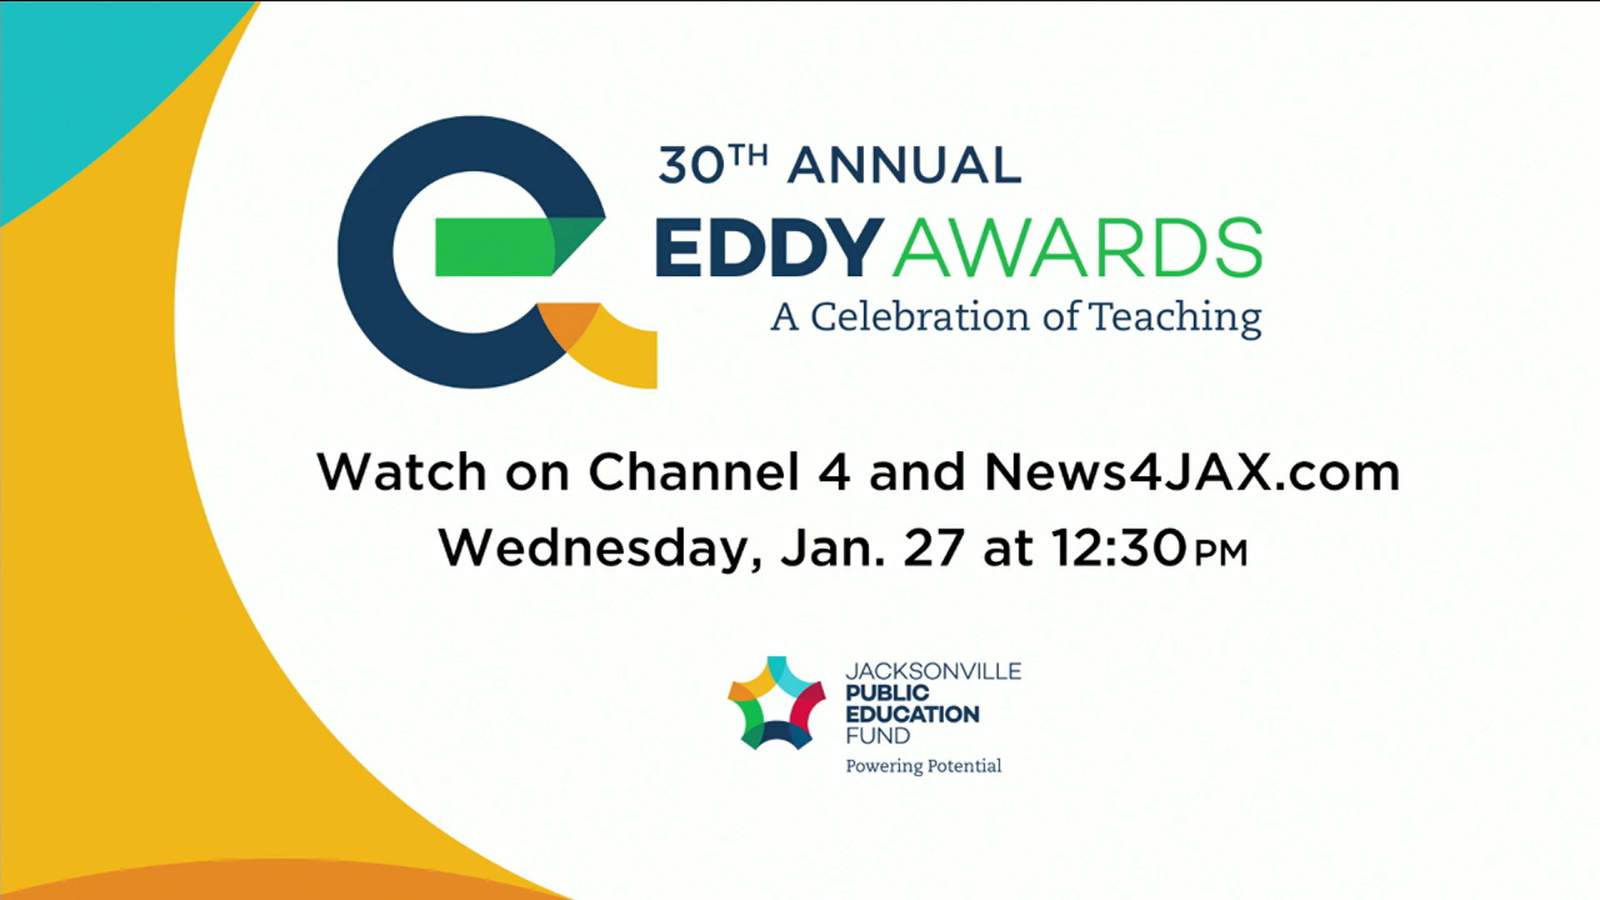 1 of 5 finalists will be named 2021 VyStar Duval County Teacher of the Year